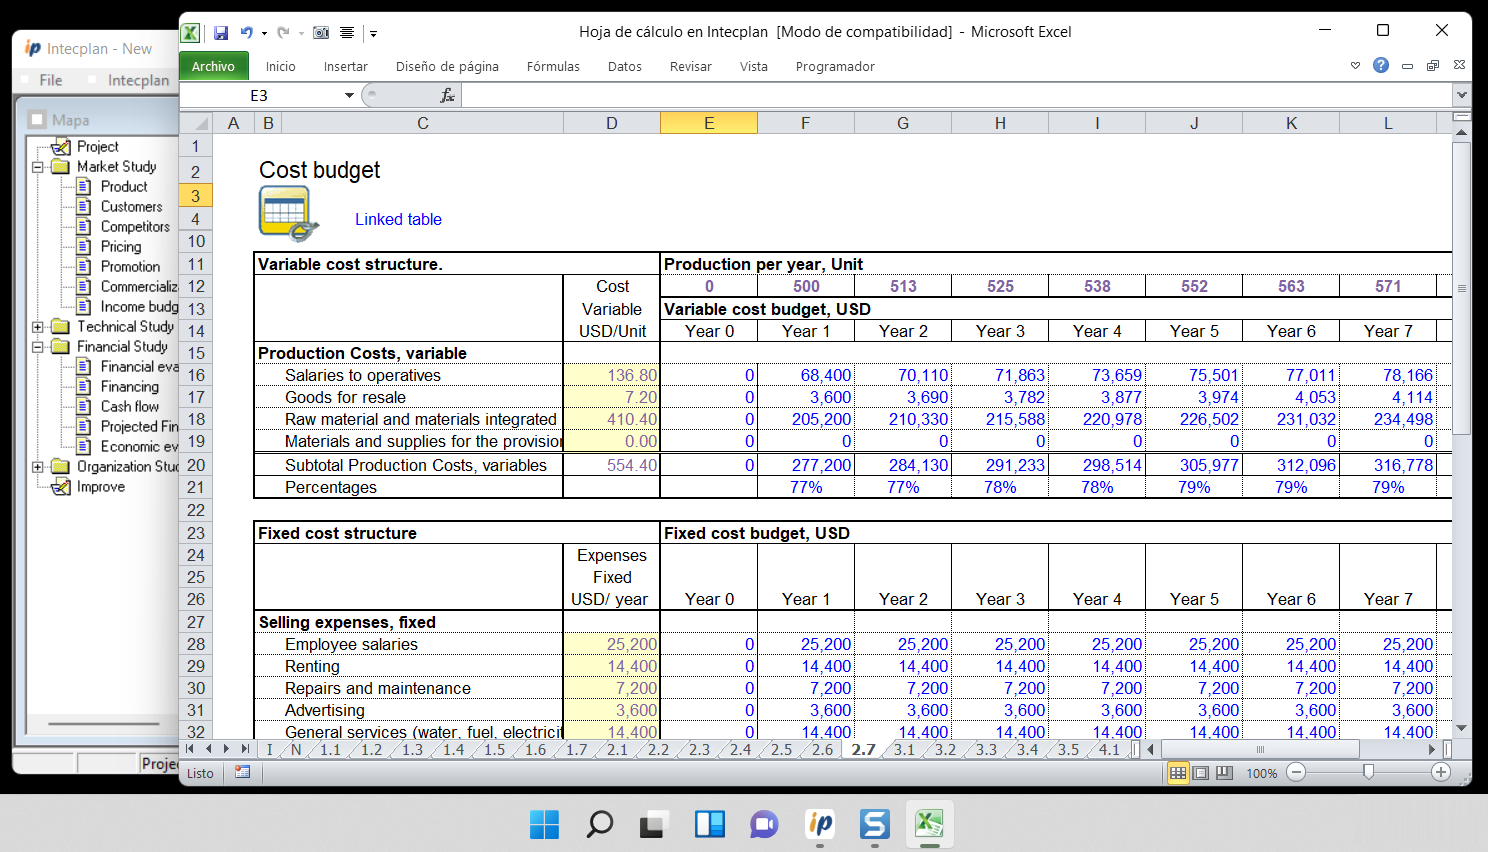 Excel Sheet. The sheet is already designed for the type of project you indicated, and you have the complete initial projections for the budgets and the financial study. Just review, adapt, and if you think necessary, edit the values.